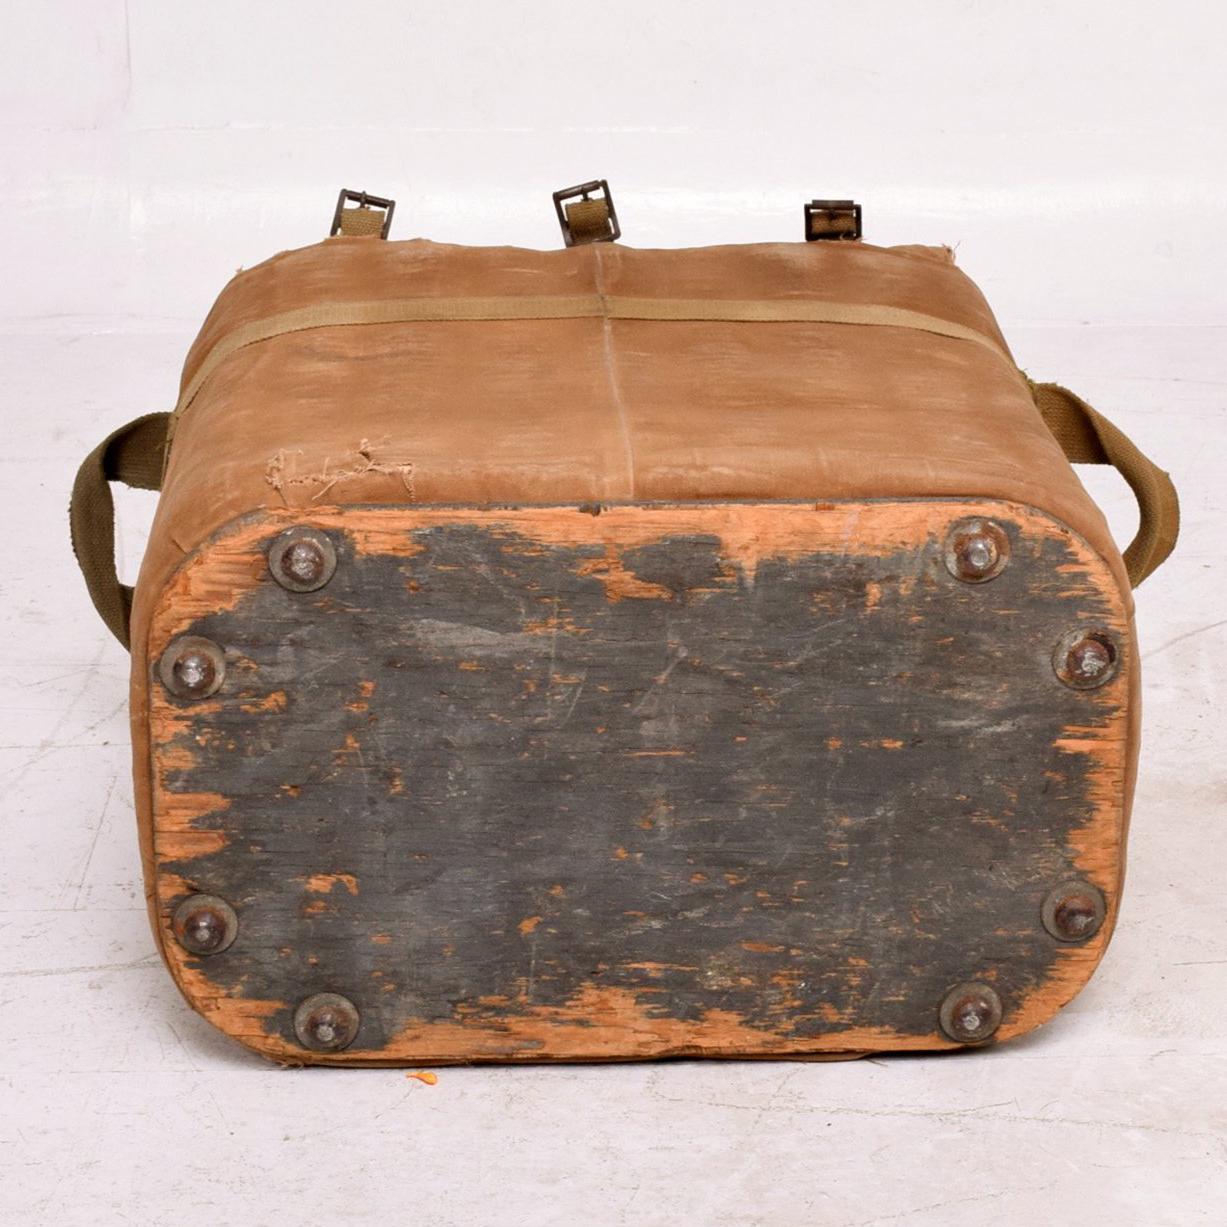 Leather Distressed Military Surplus Industrial Ice Cooler Tote Chest 1940s US Army